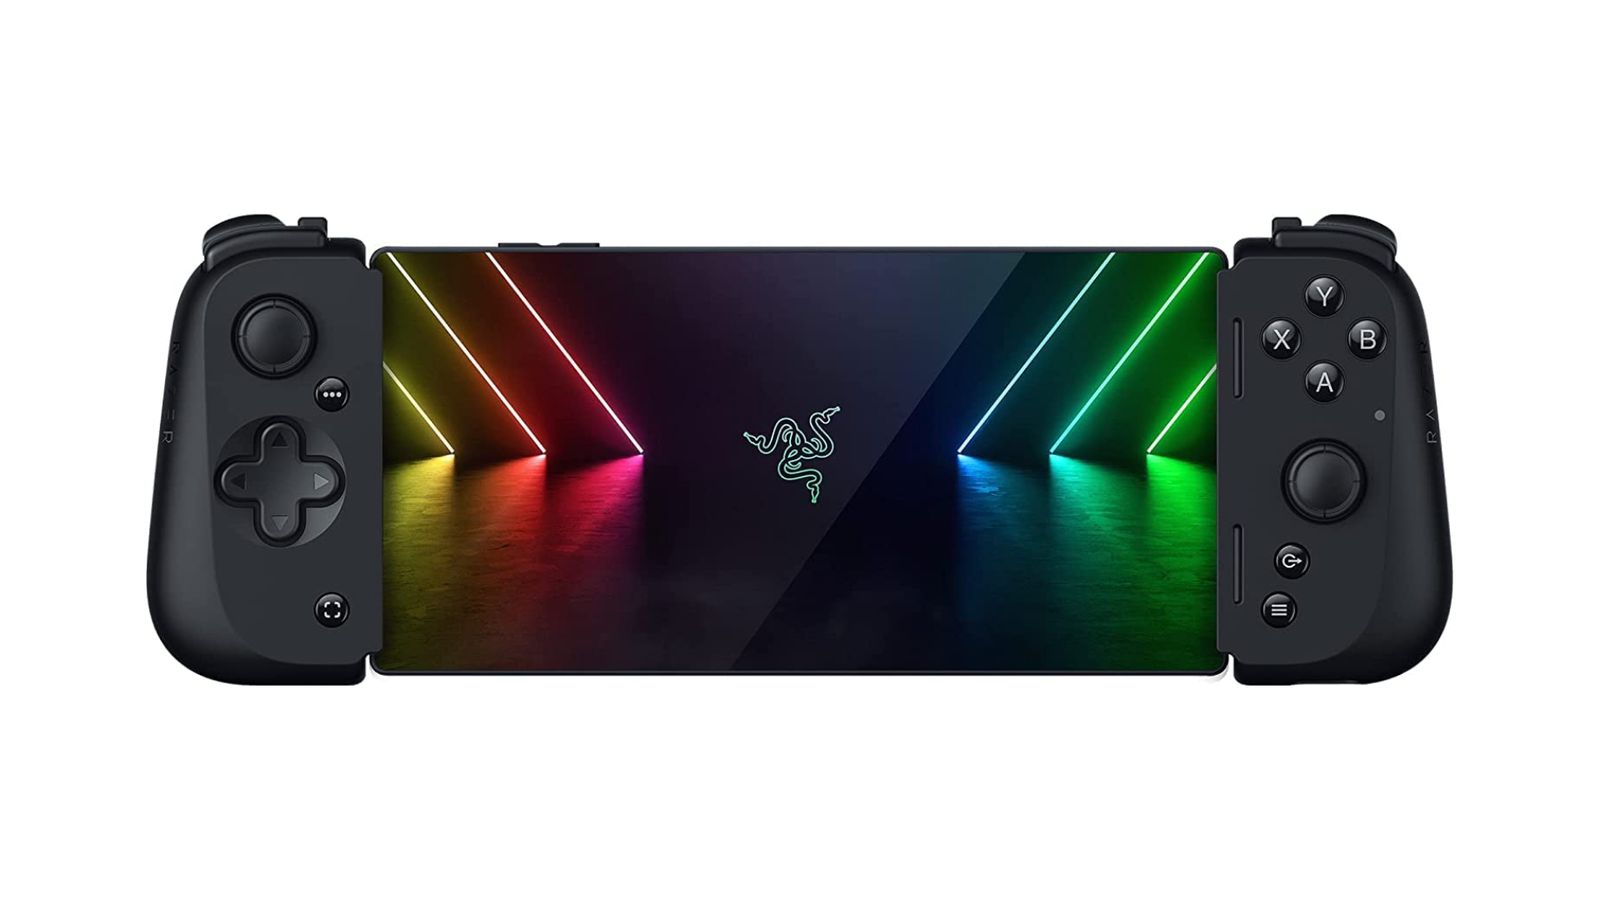 Razer Kishi V2 product image of two black sides of a controller either side of an Android phone.